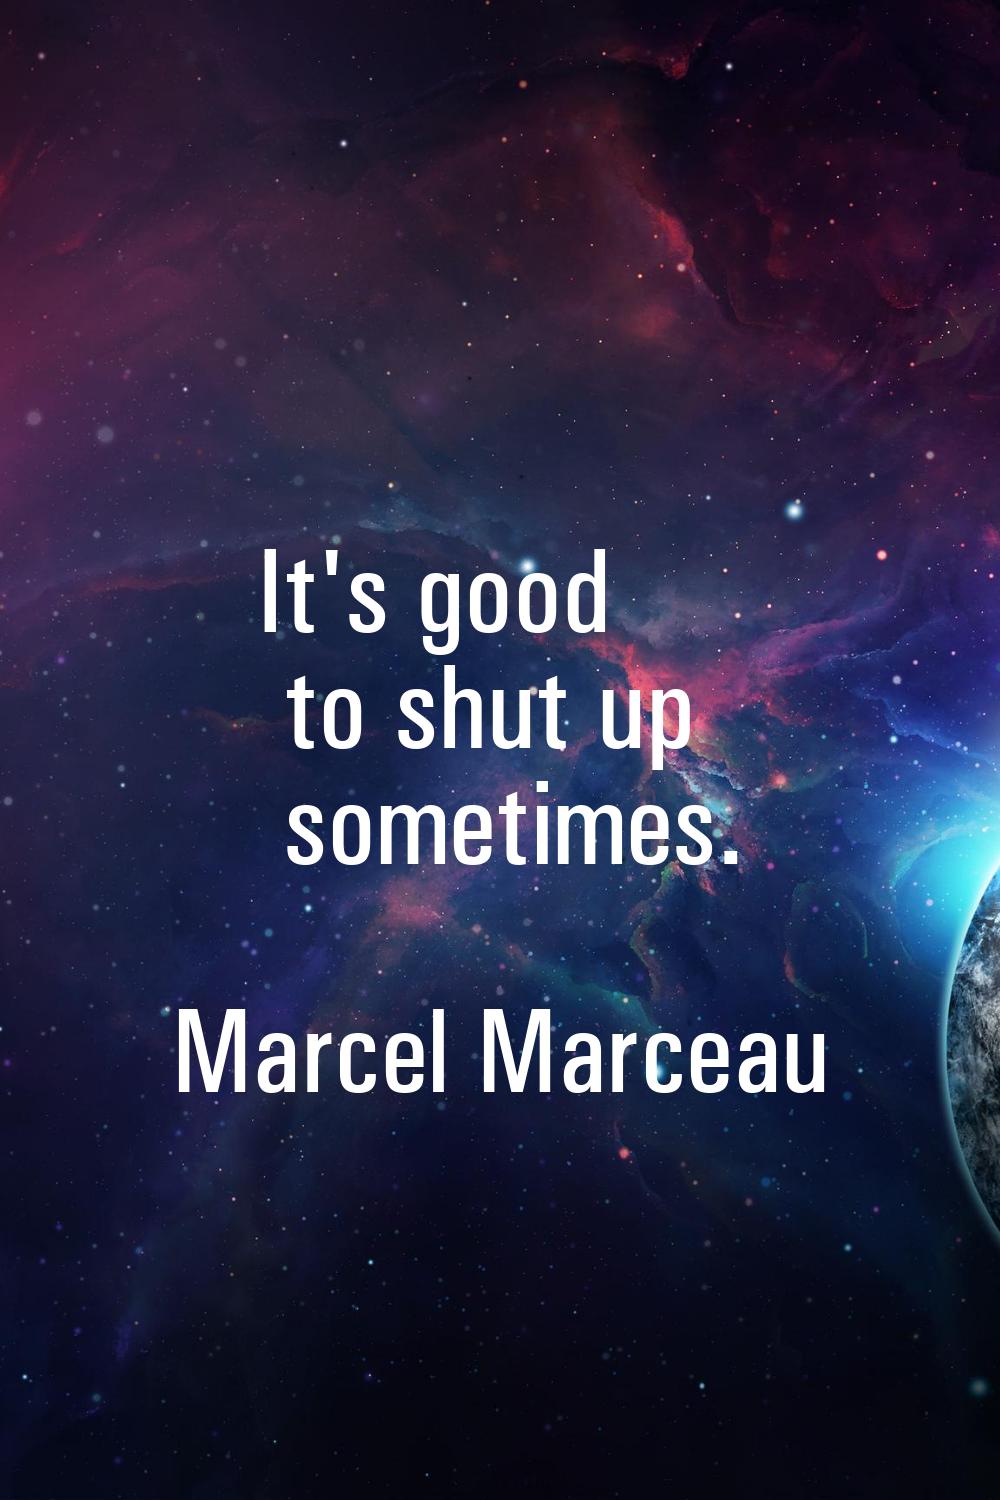 It's good to shut up sometimes.